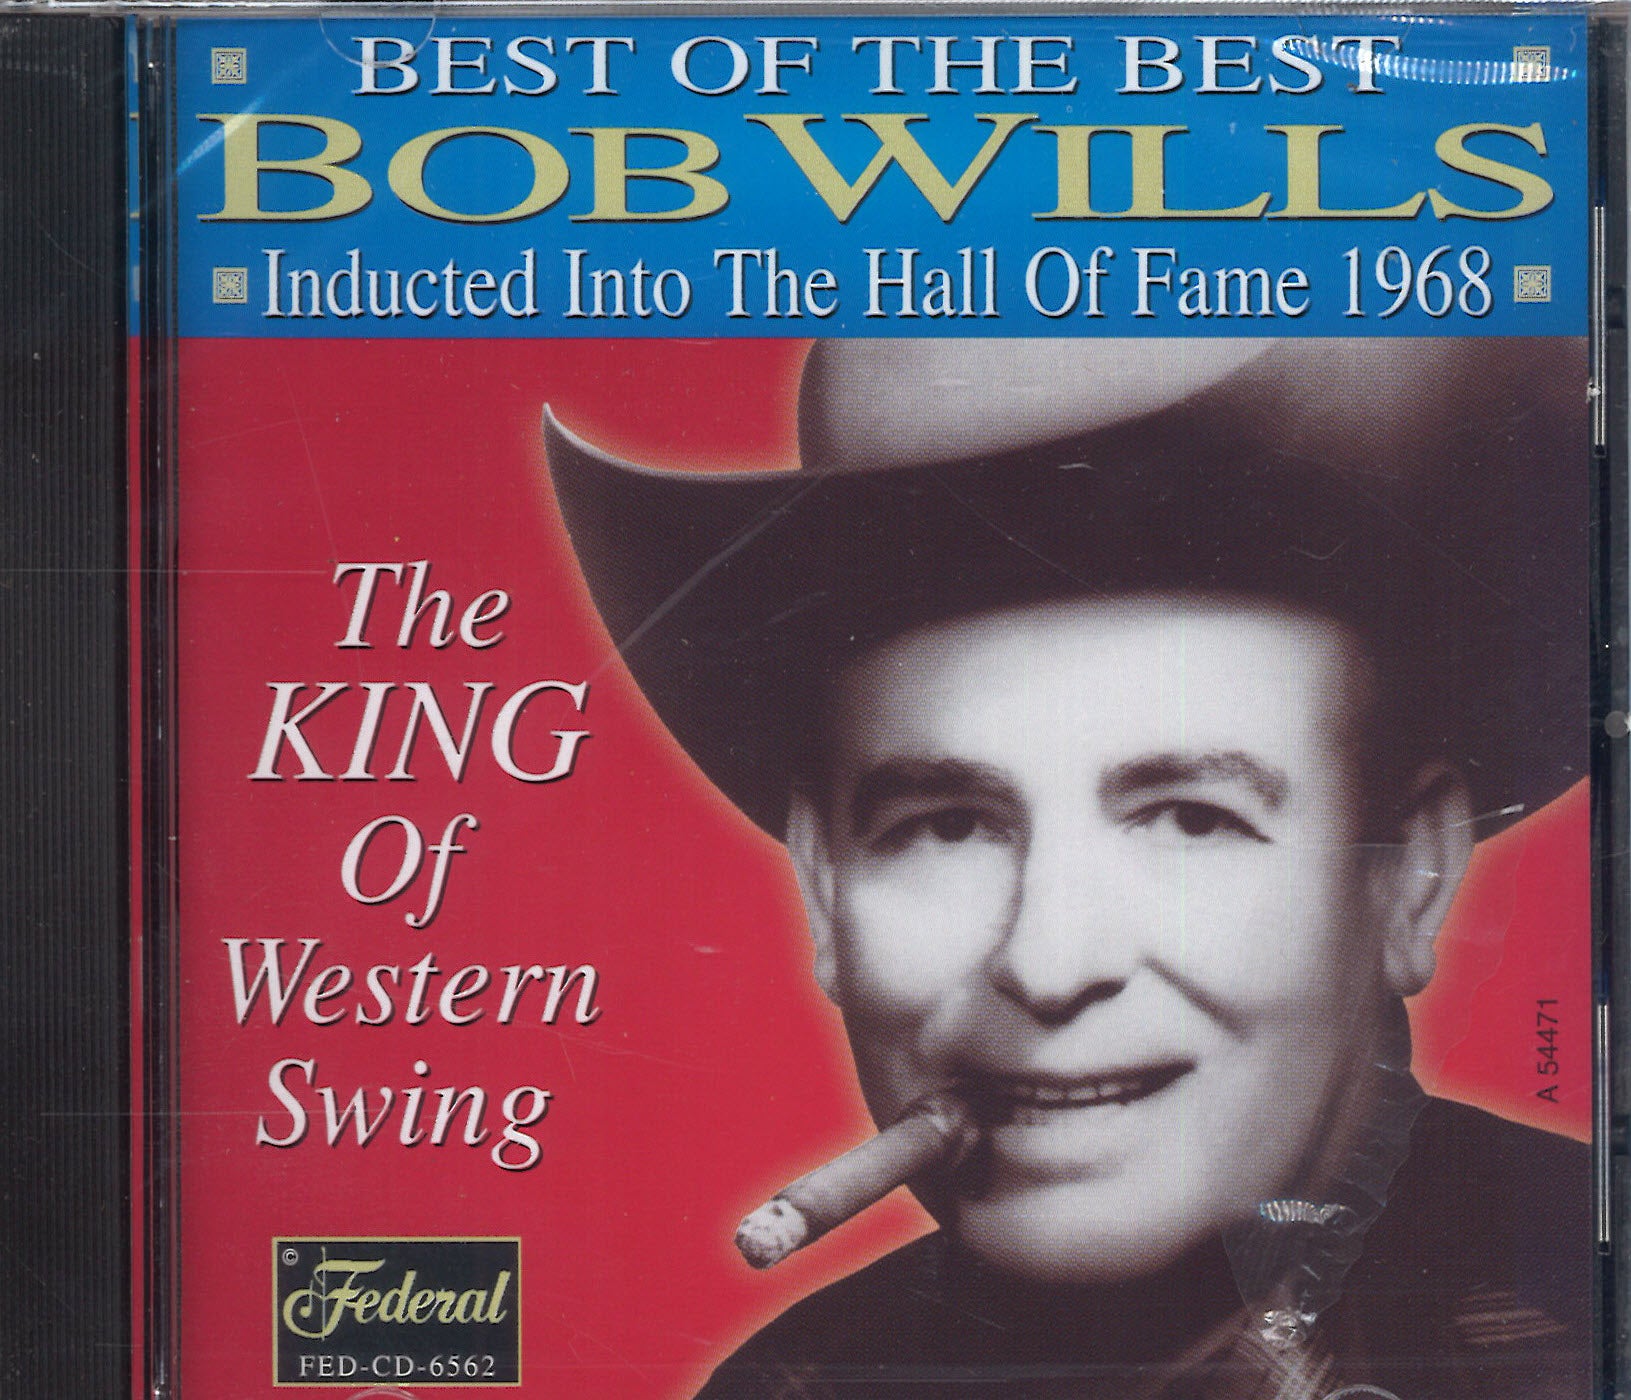 Bob Wills Inducted Into The Hall Of Fame 1968